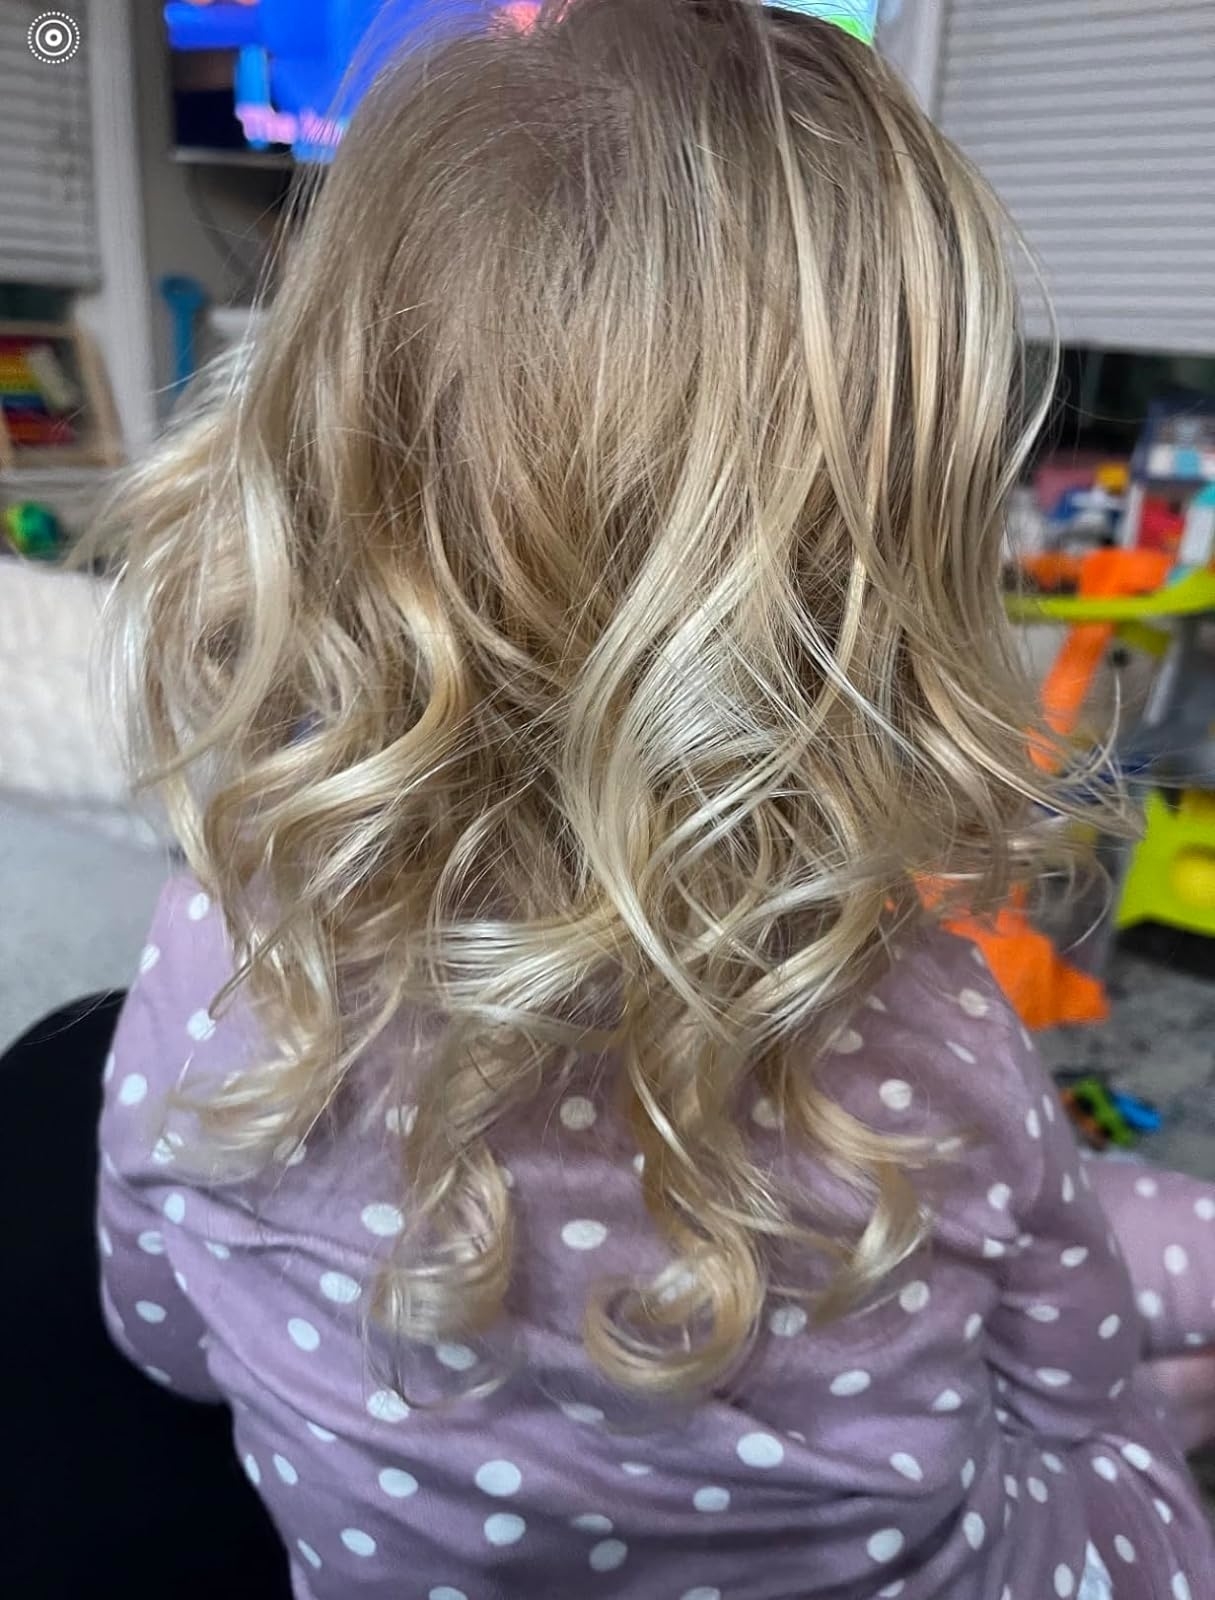 Reviewer’s photo of the back of their daughter’s curly hair